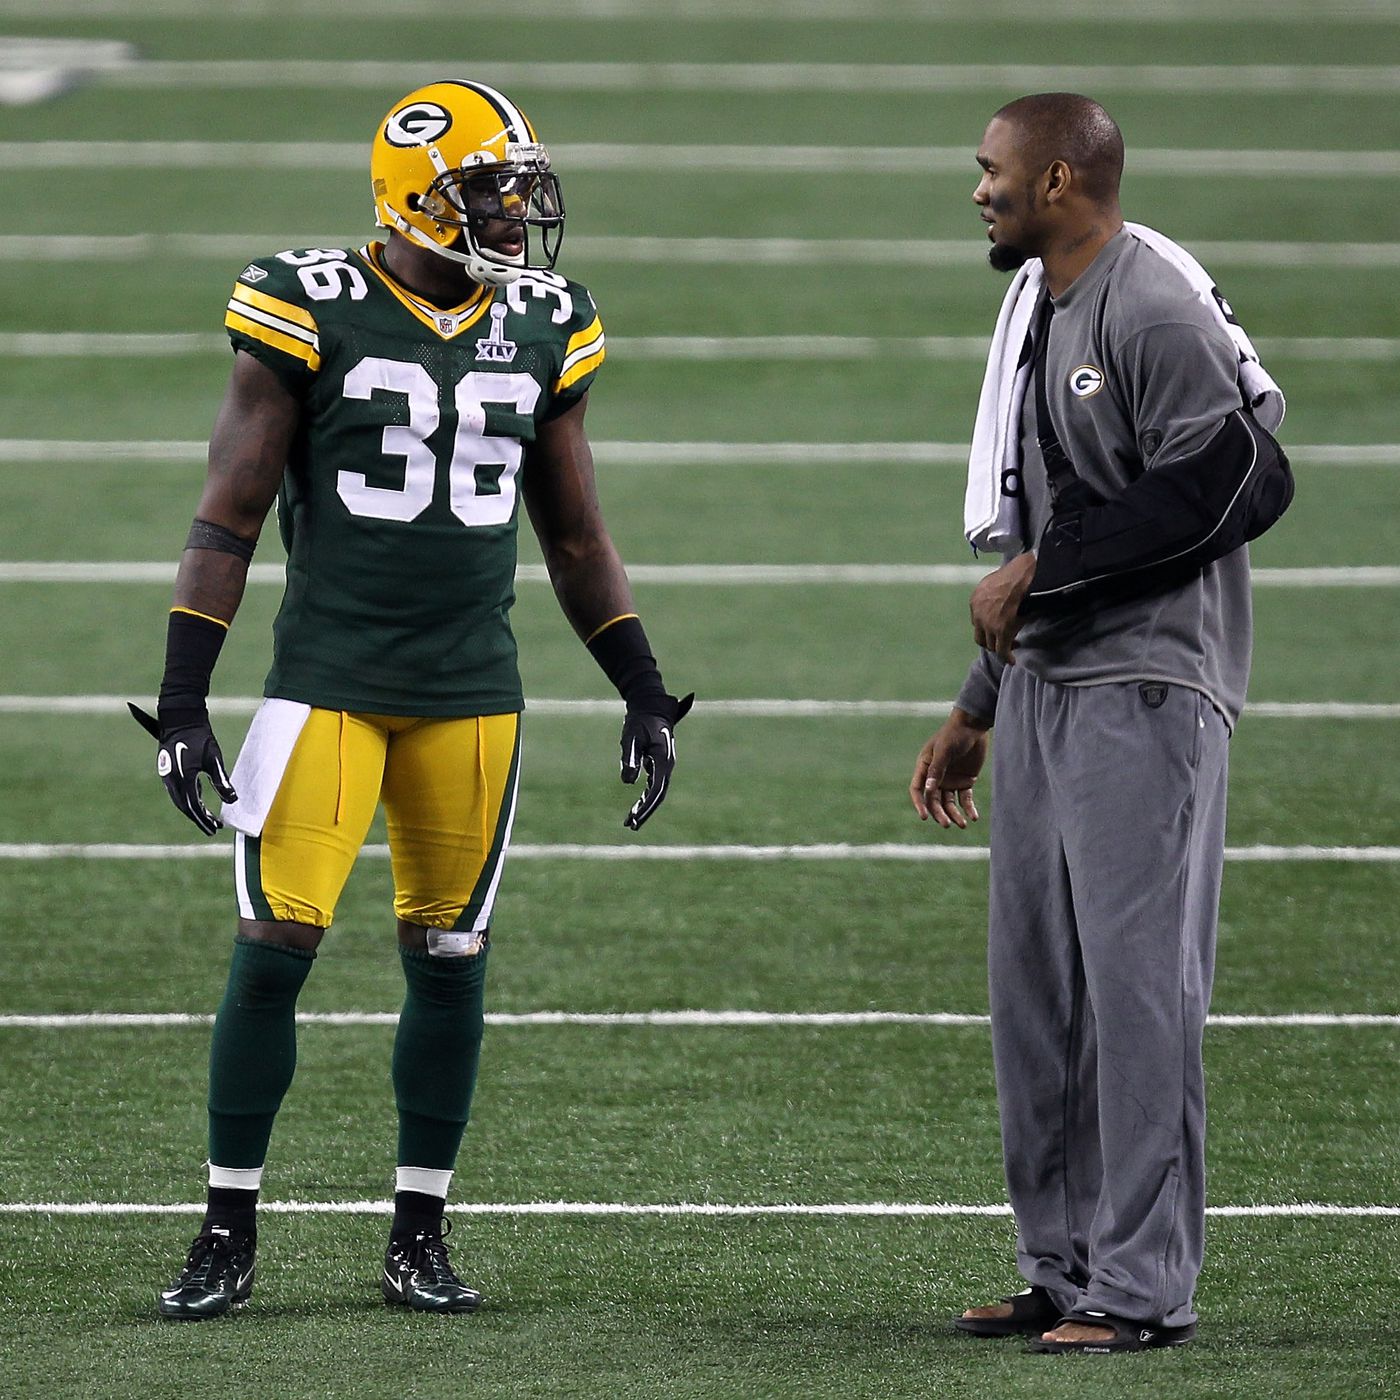 Charles Woodson to present Nick Collins for Packers Hall of Fame induction  - Acme Packing Company